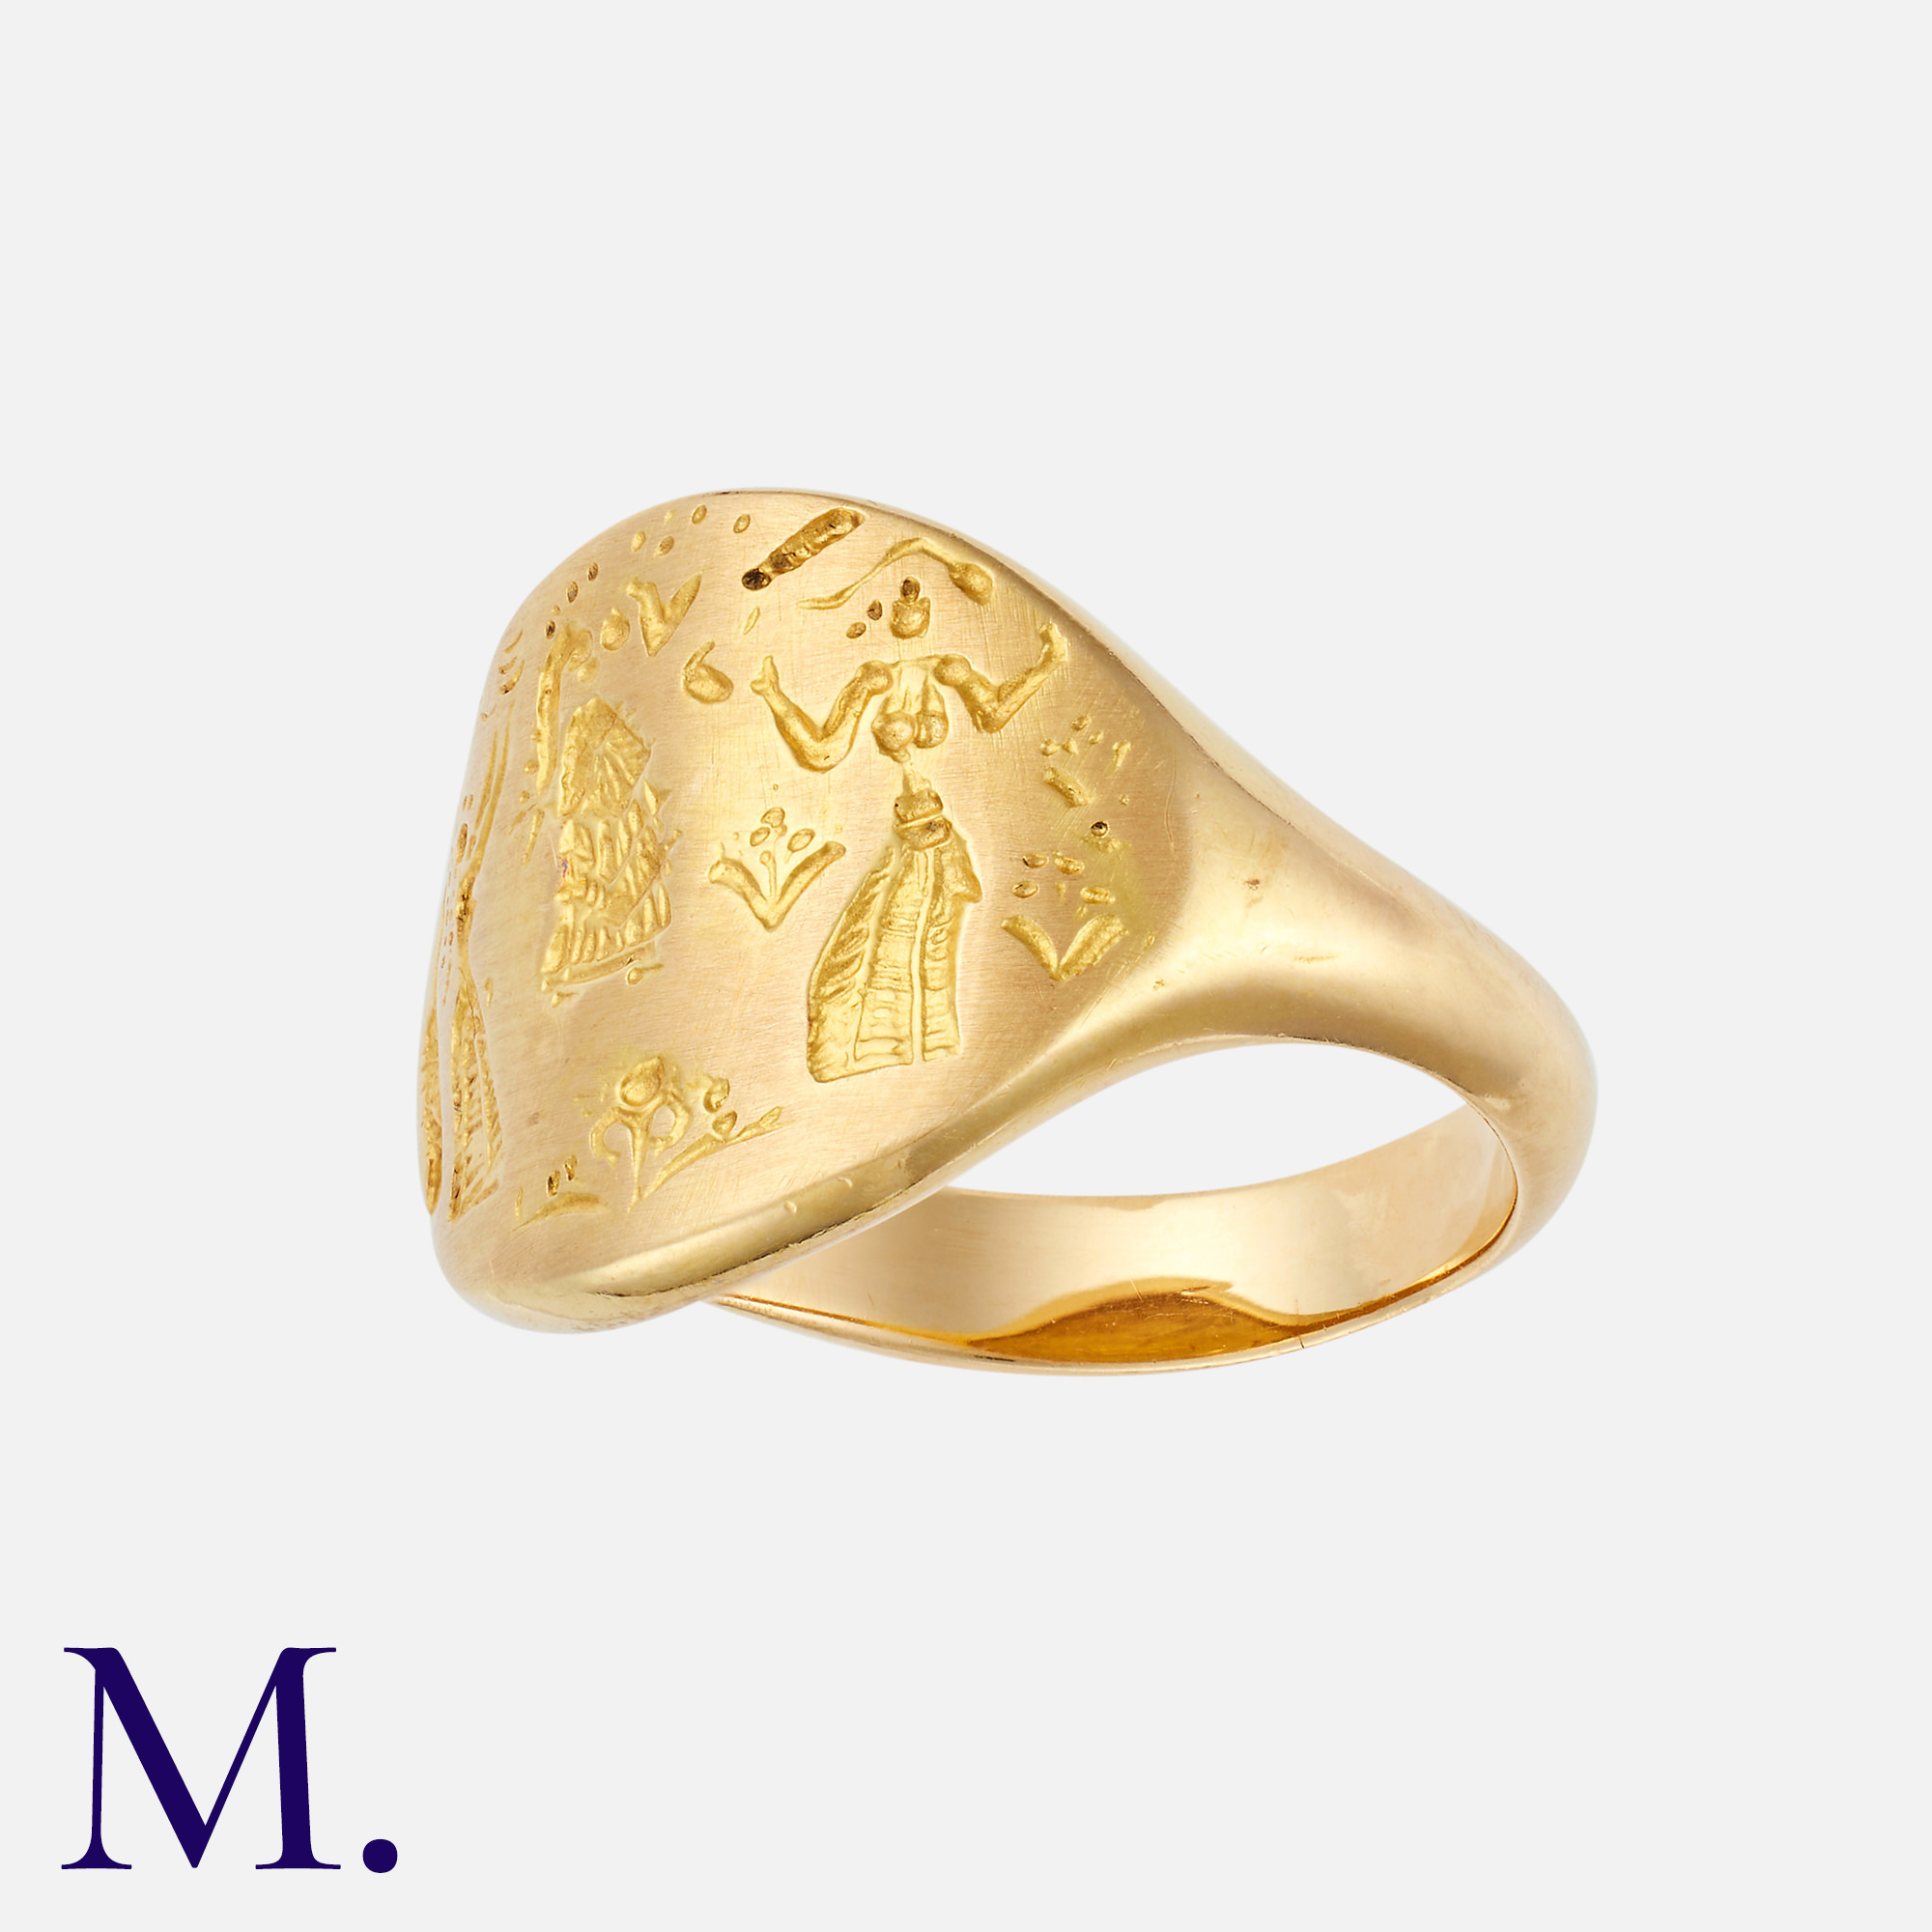 ZOLOTAS. A Signet Ring in 18K yellow gold with carved female forms to the oval face. Size: K Weight: - Image 2 of 2